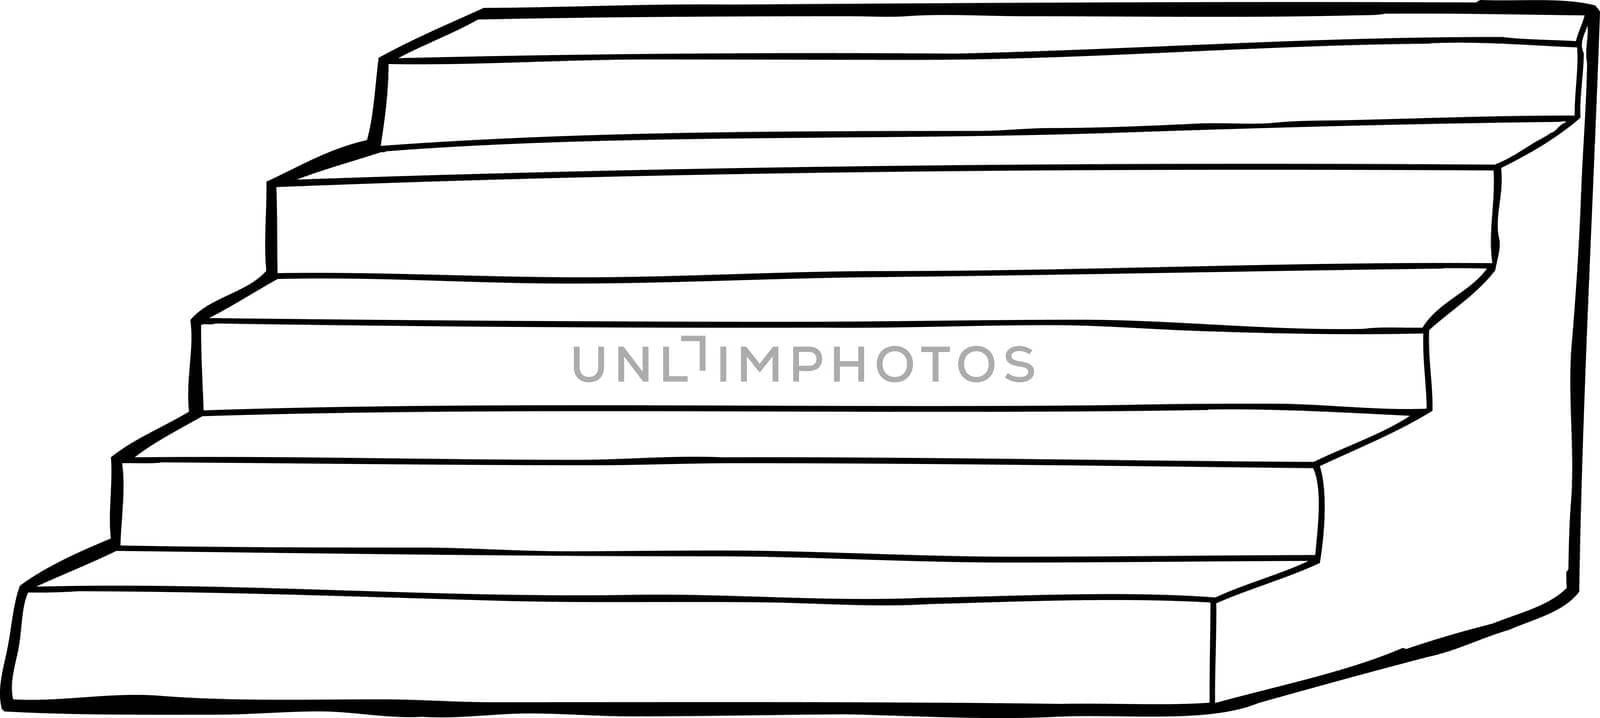 Cartoon outline of hand drawn steps over white background